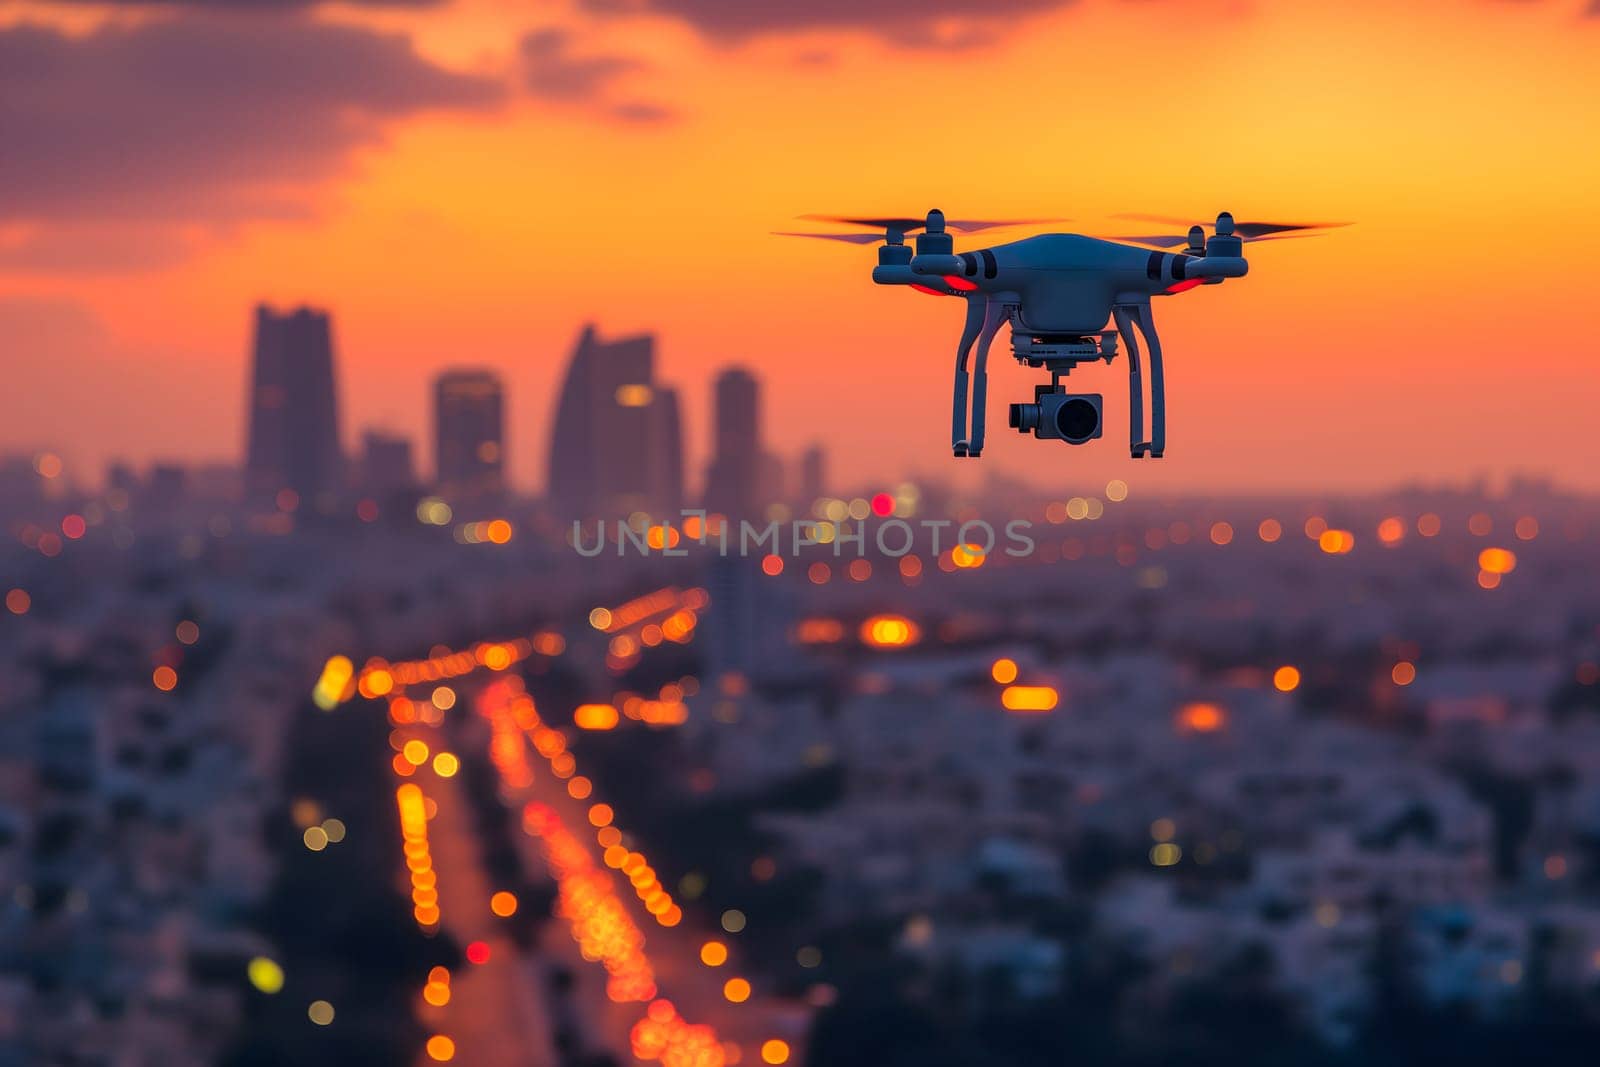 one drone over city at summer sunrise. Neural network generated image. Not based on any actual scene or pattern.